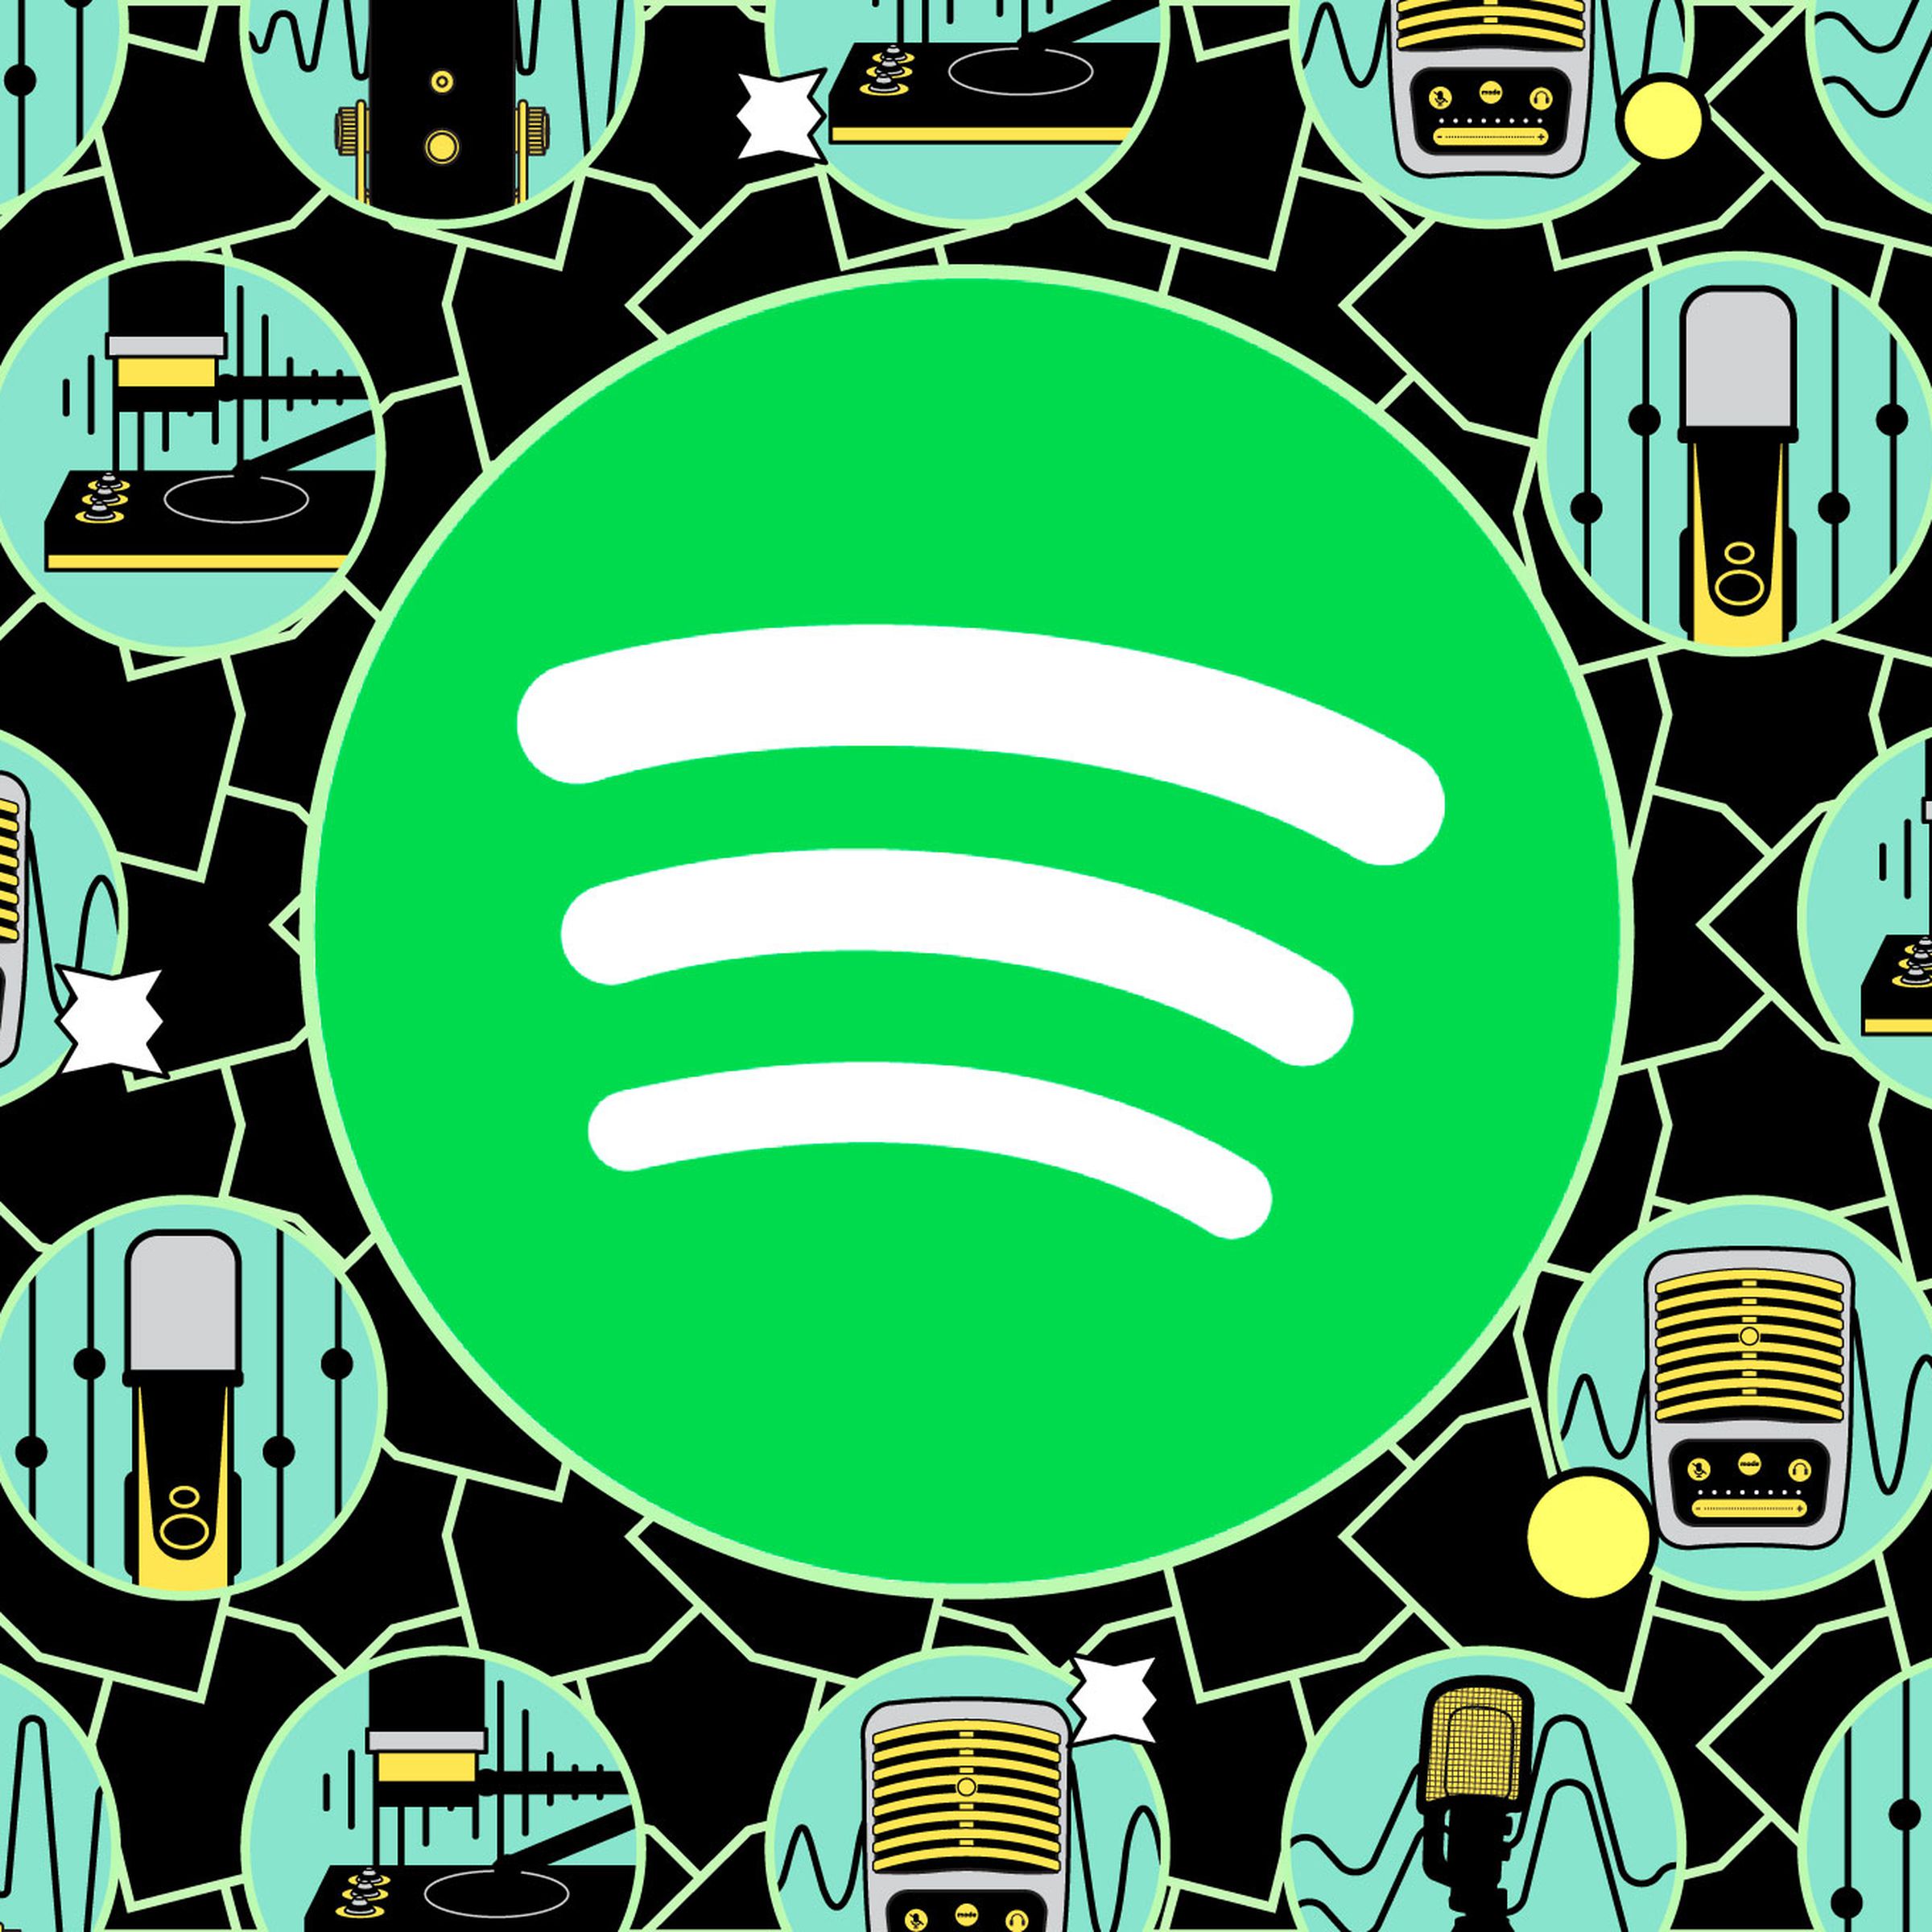 Spotify logo against an illustrated background with round circle representing audio stuff.